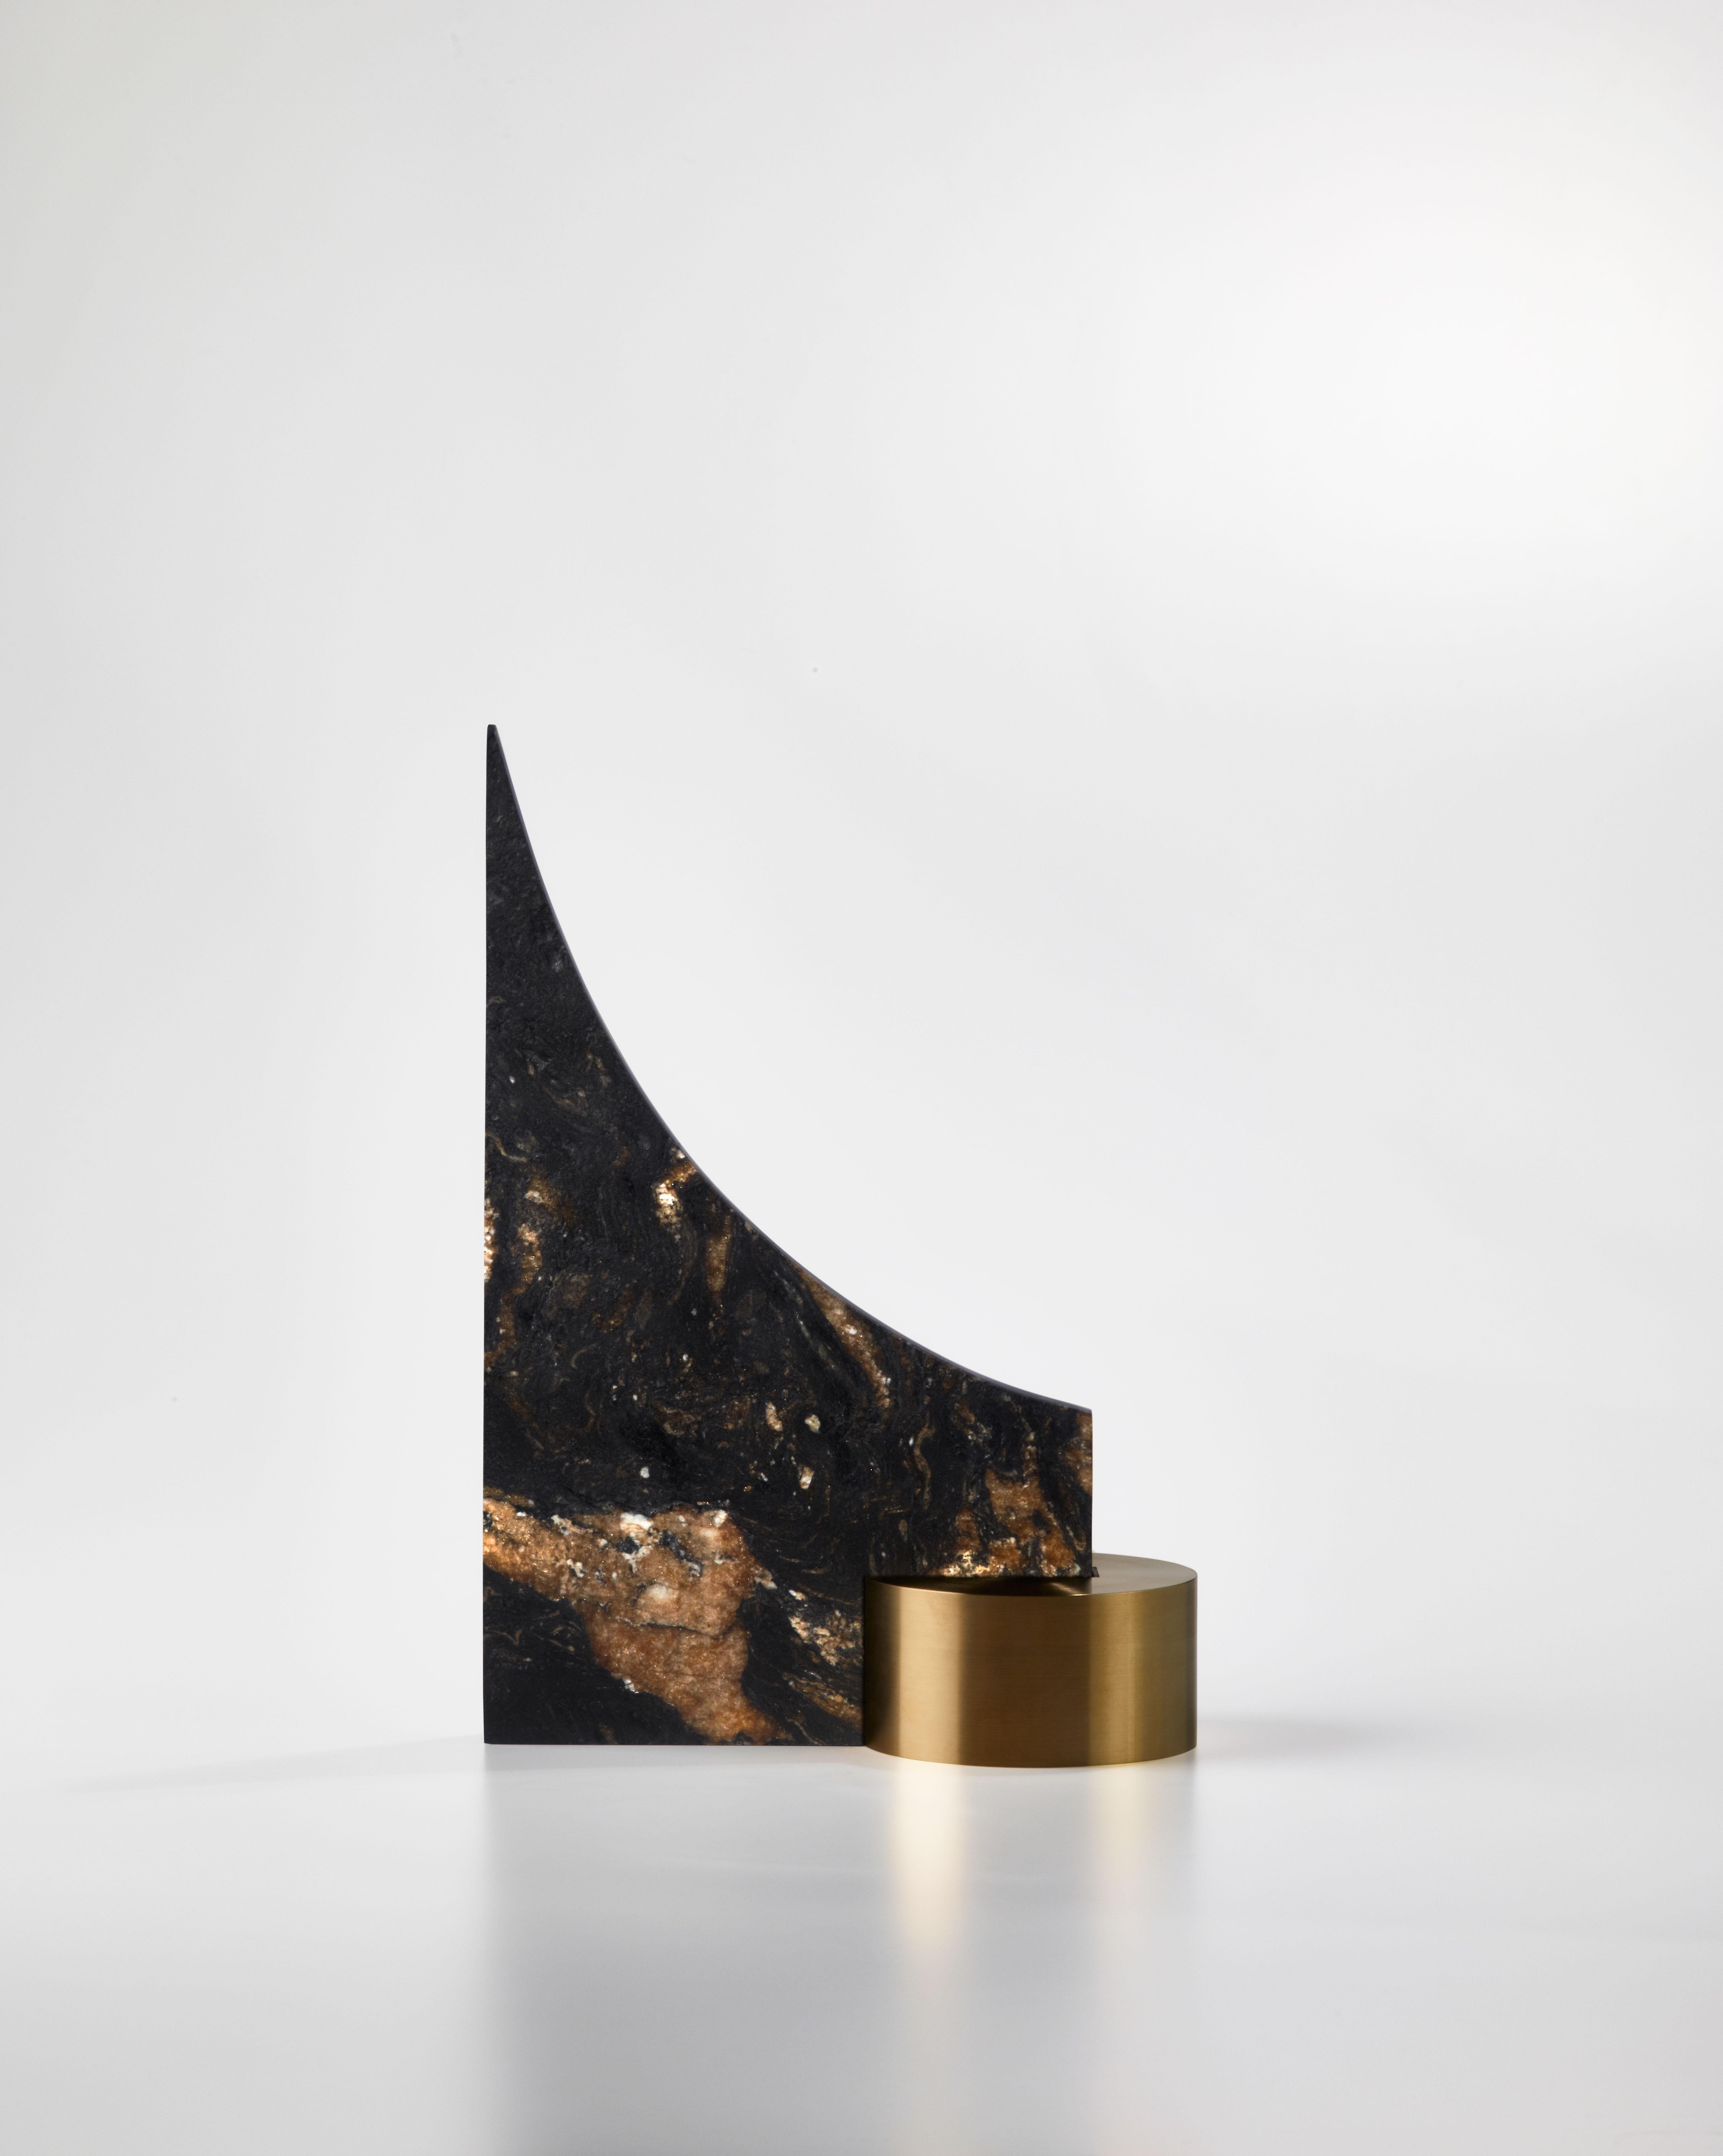 Brass and granite bookend, signed William Guillon
Signed William Guillon
Limited edition of 20
Signed and numbered
Barocco granite, solid brass
Dimensions: H 30 cm x W 22 cm x D 12 cm
Handsculpted in France

At the crossroads between his